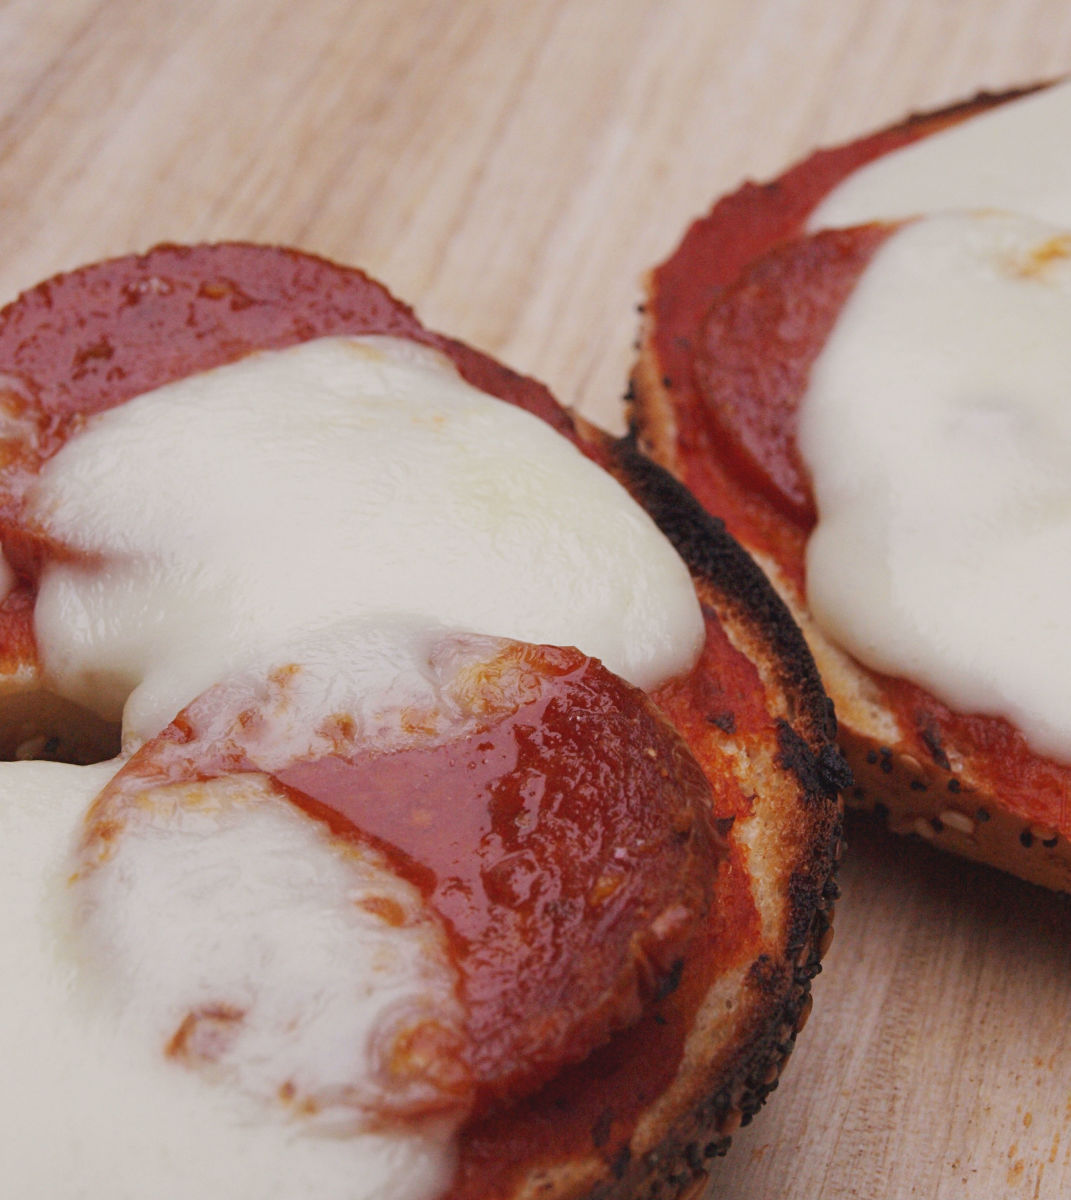 A pizza bagel with sauce, mozzarella cheese, and pepperoni sausage.